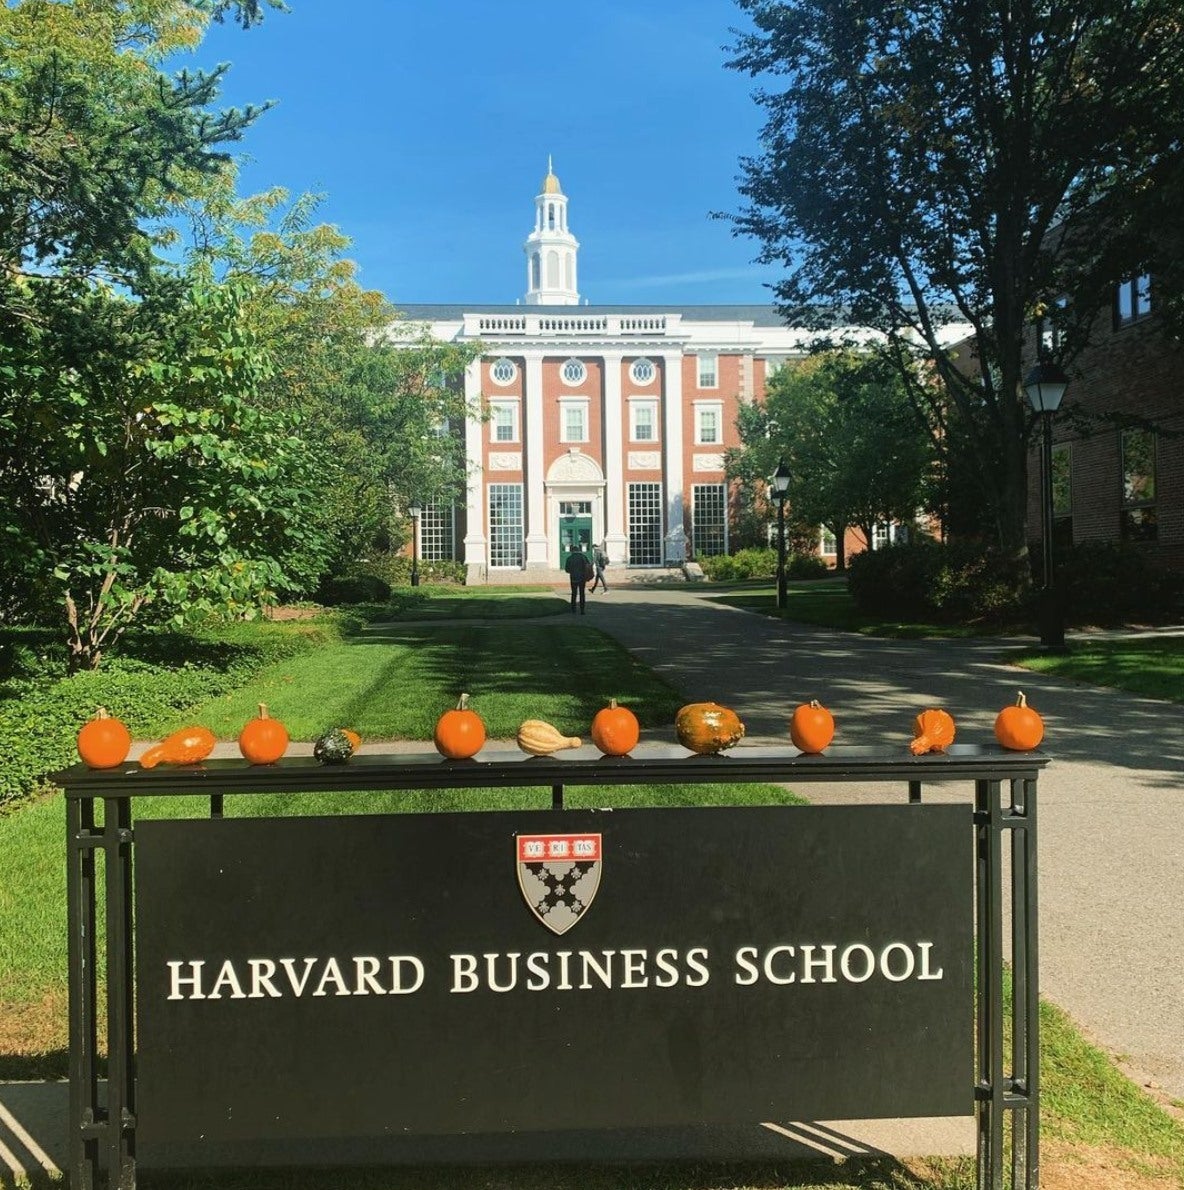 Pumpkins and gourds sit atop the HBS sign, with a brick building in the background